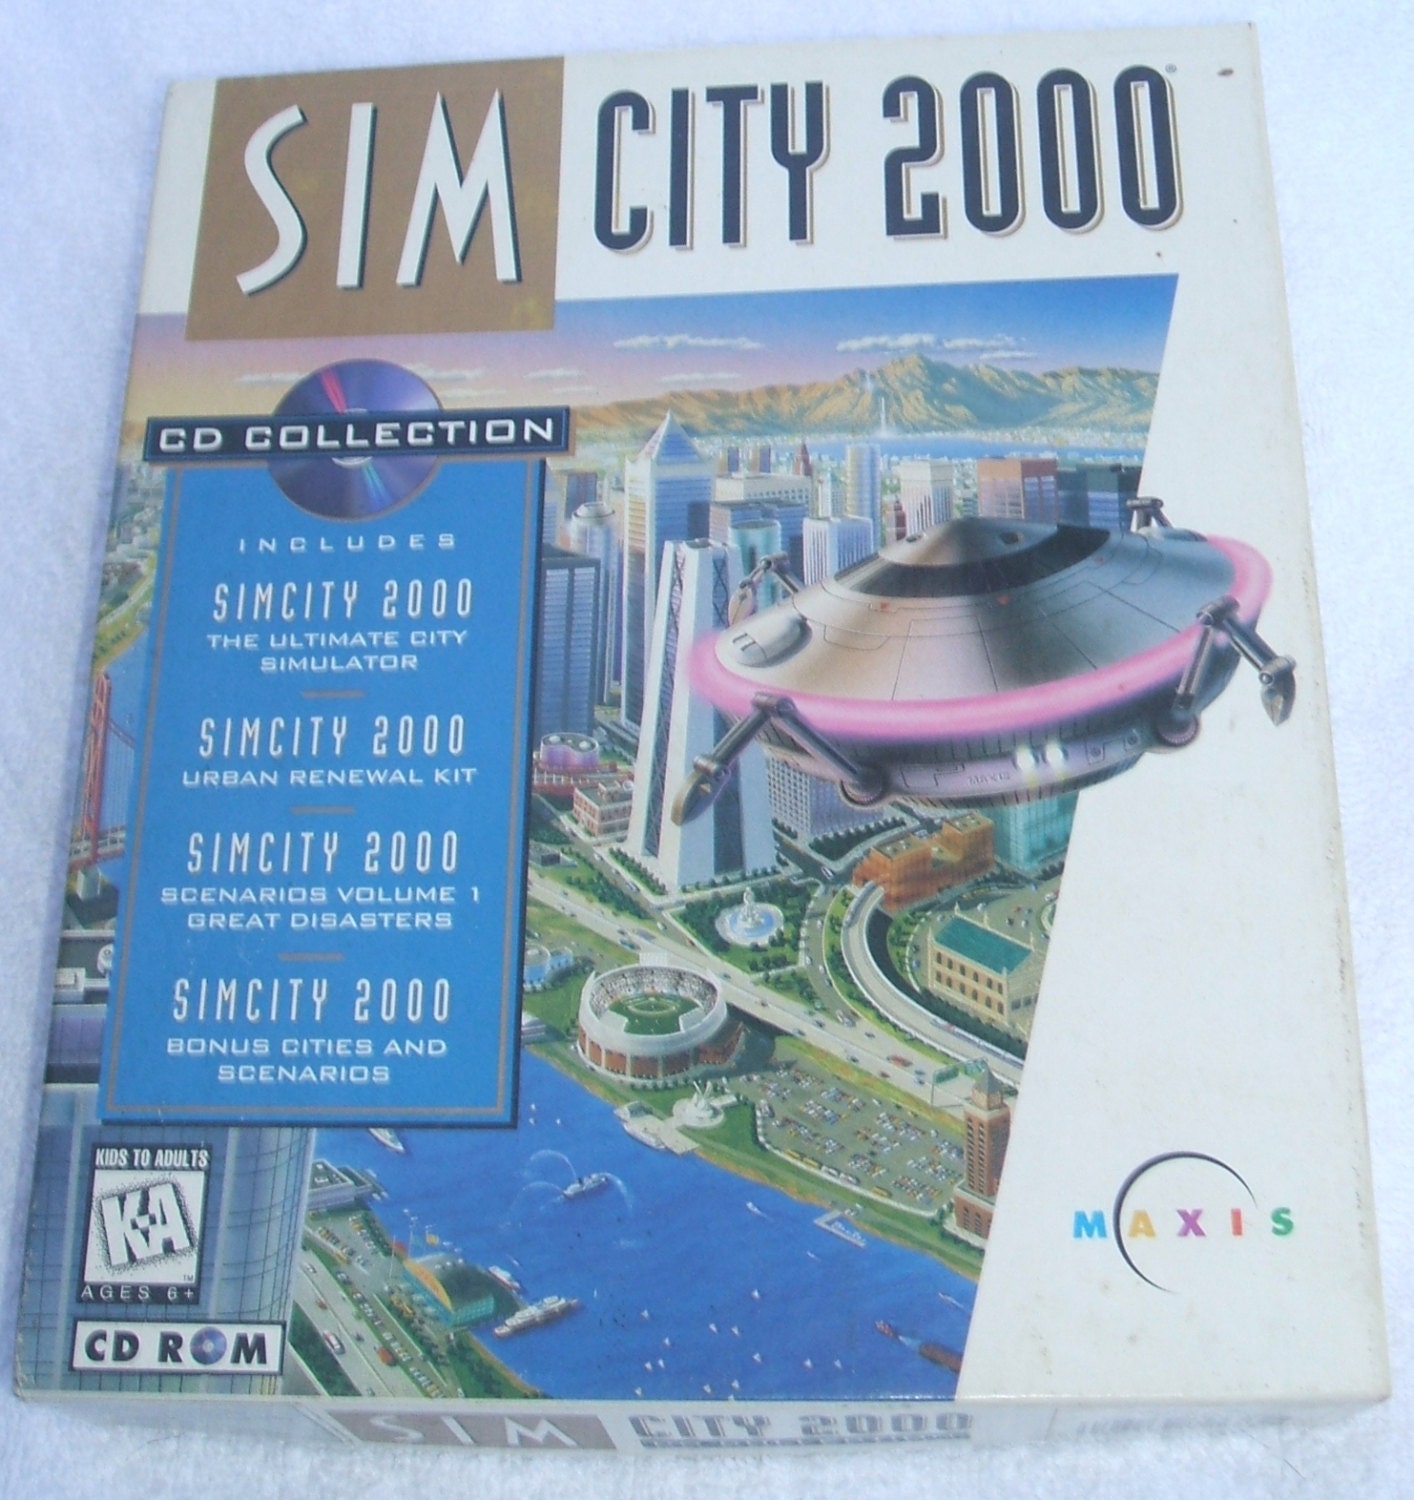 simcity 2000 download for windows 10